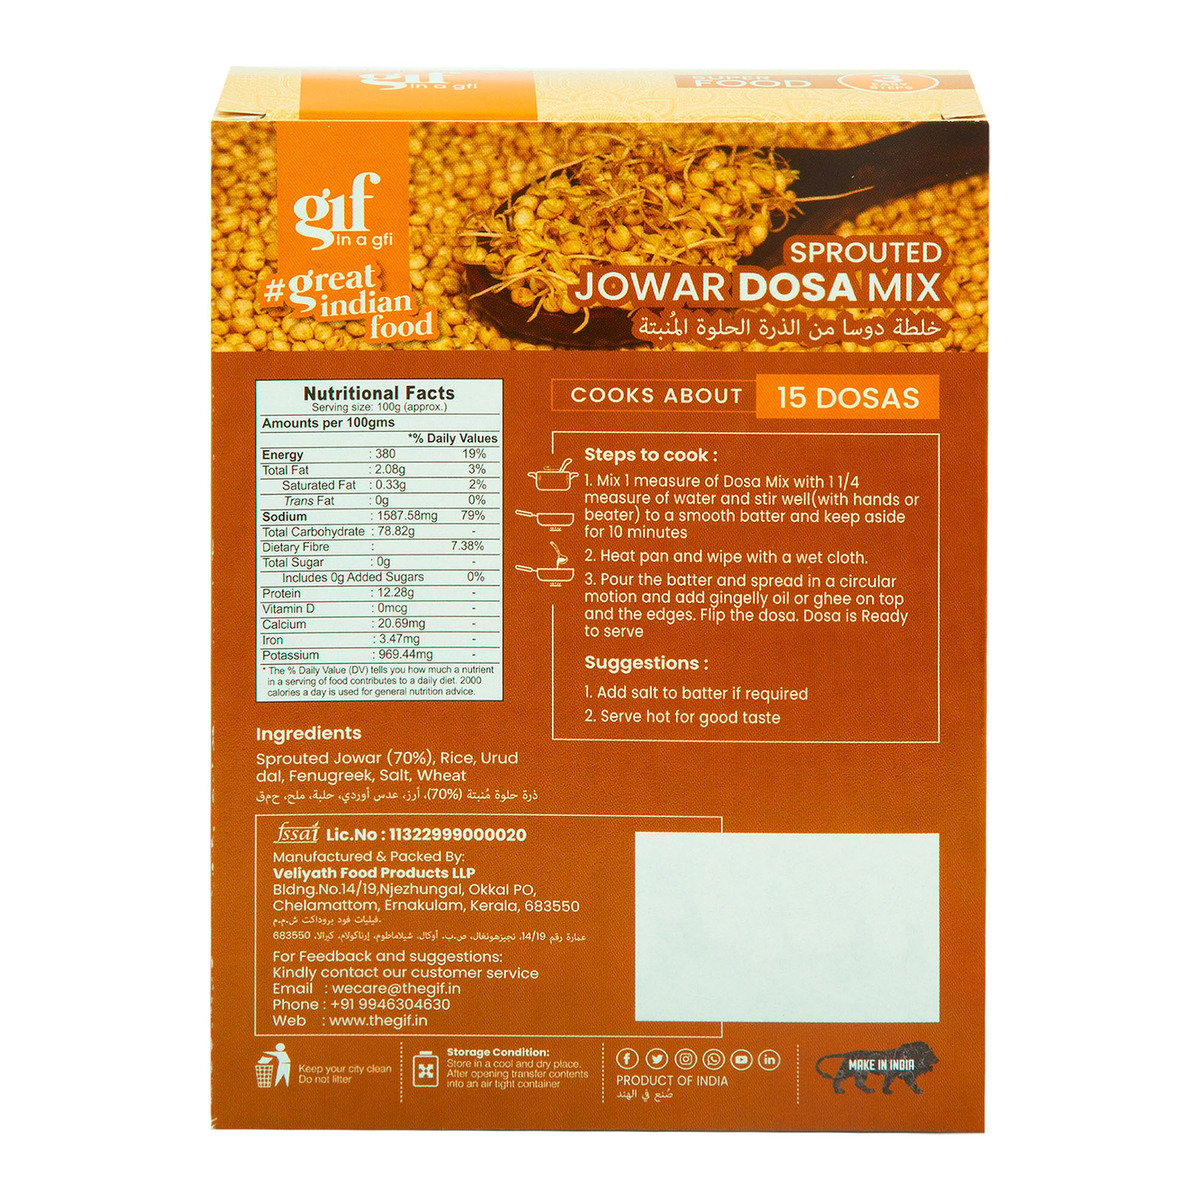 Great Indian Food Sprouted Jowar Dosa Mix 300 g